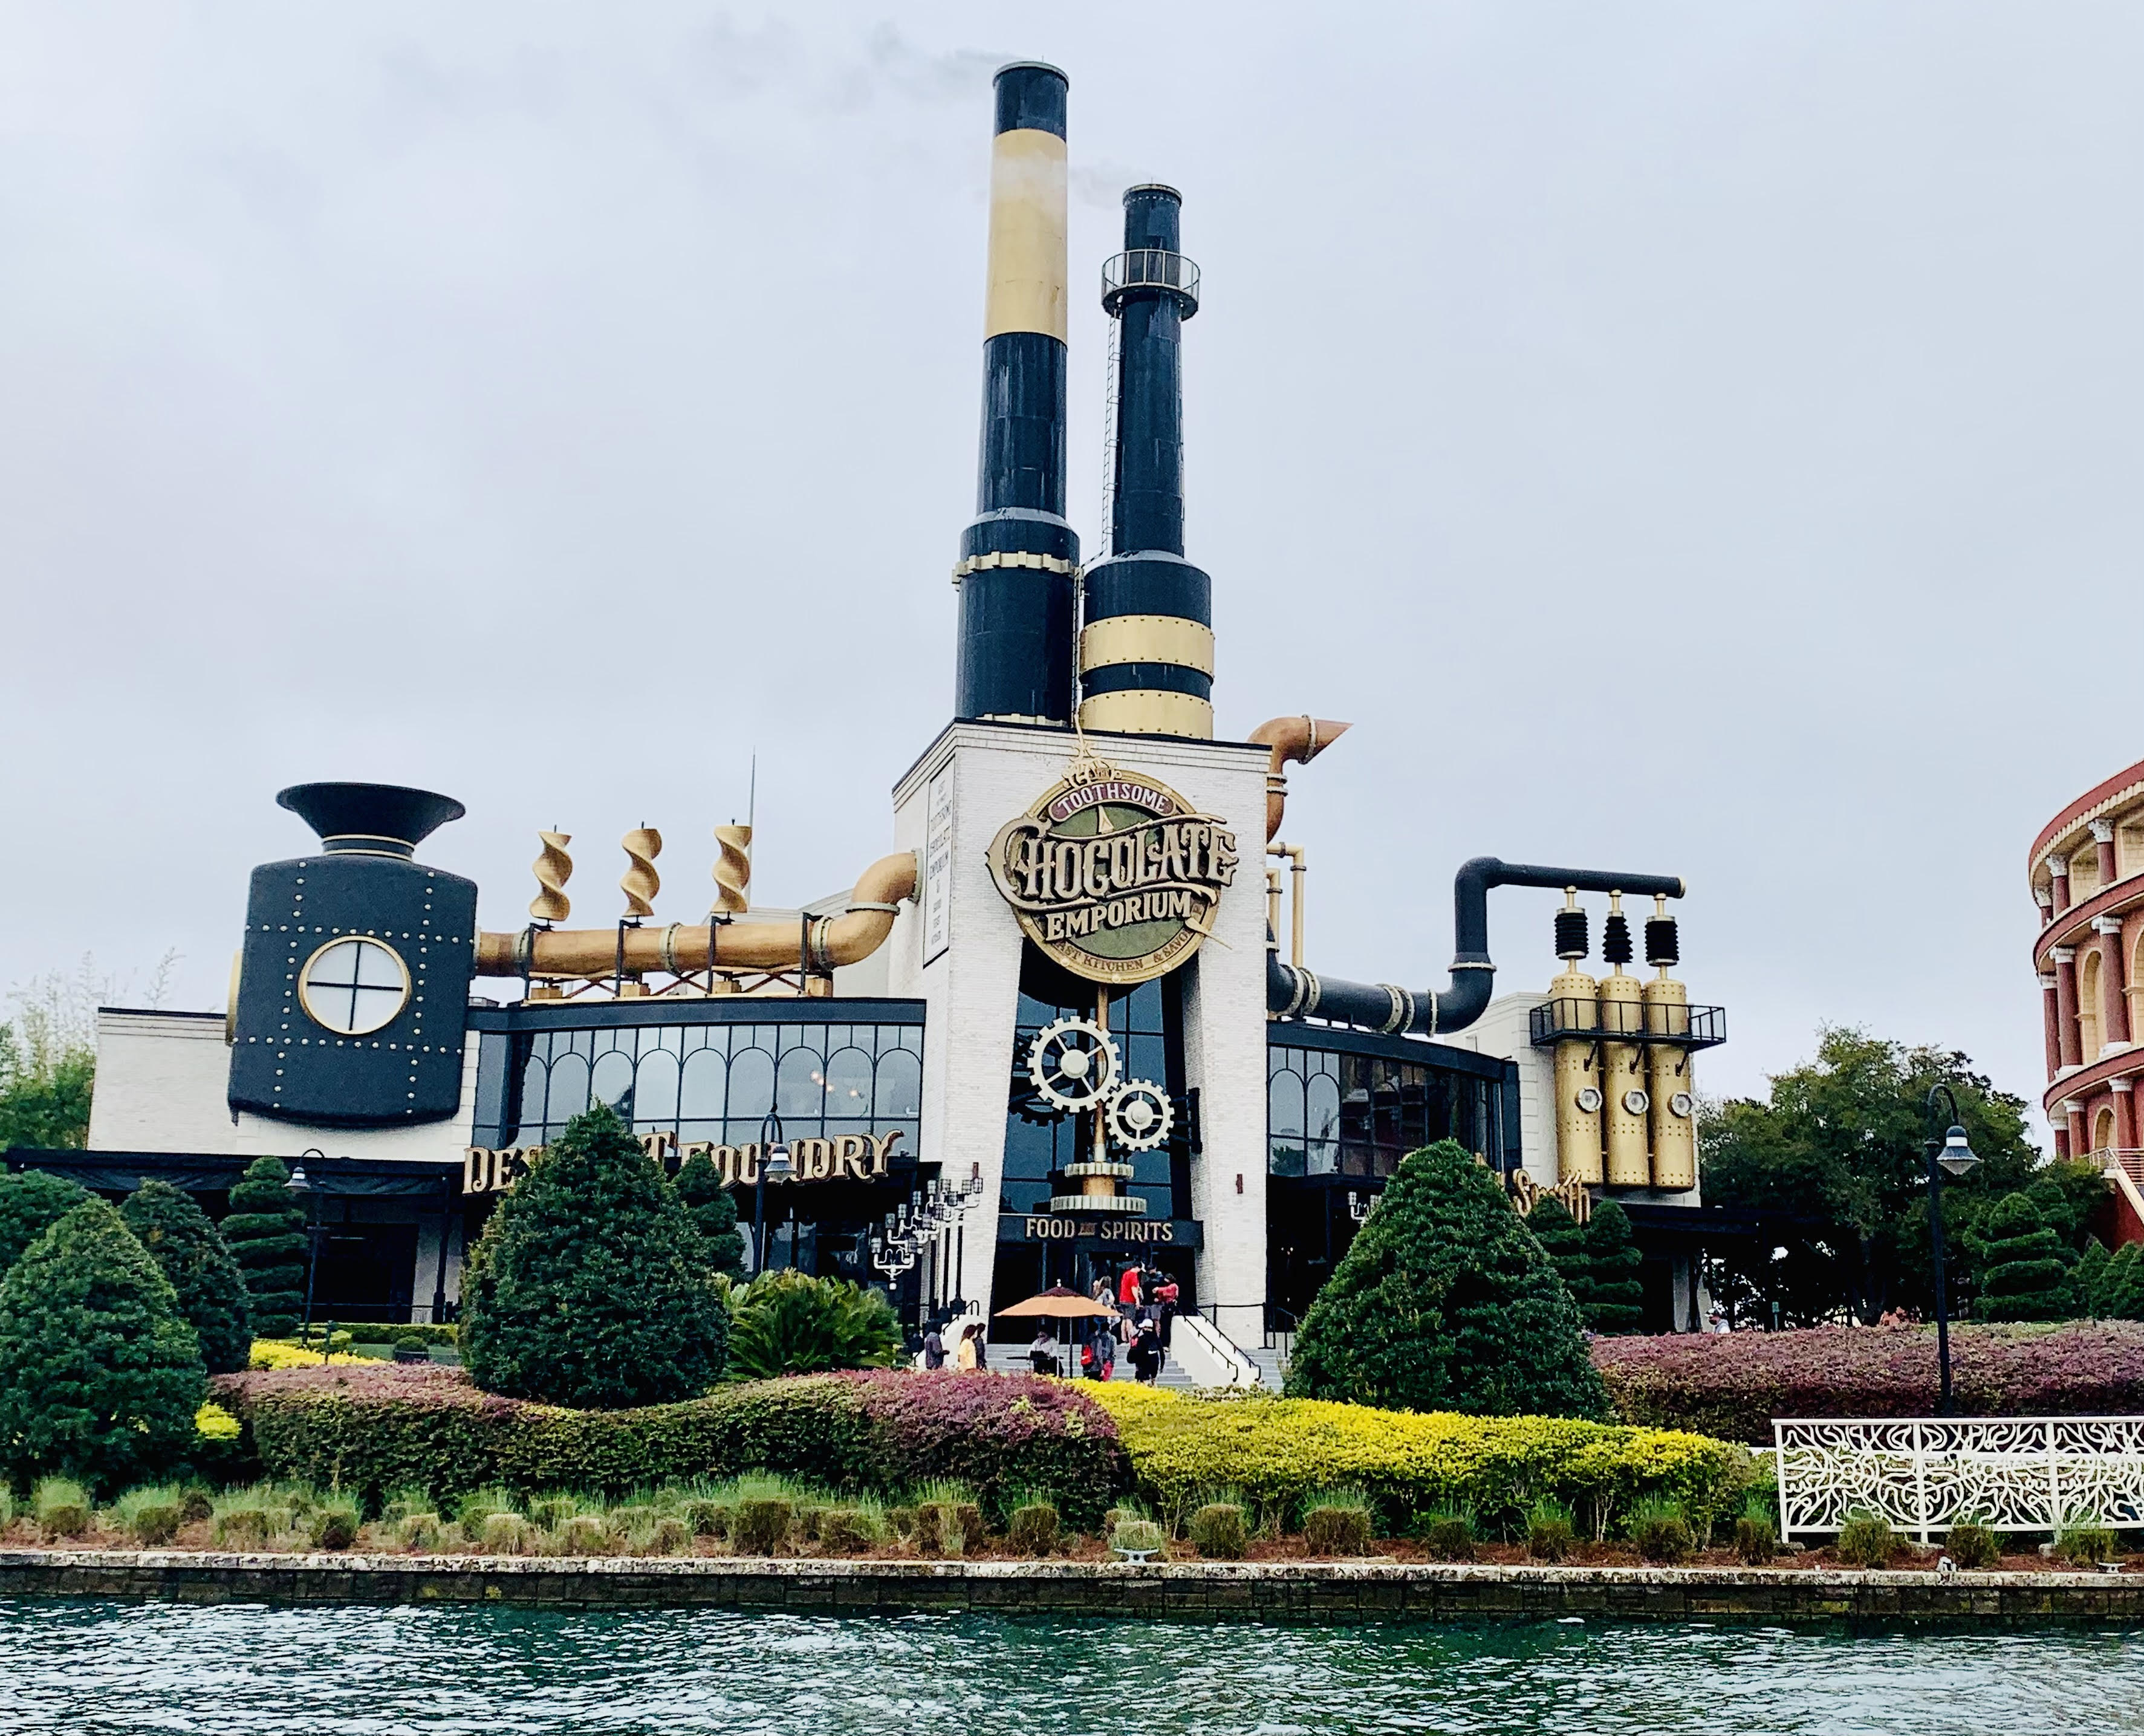 The 7 best restaurants in Citywalk ranked by top U.S. family travel blog, Travel With A Plan!  (Toothsome Chocolate Emporium)